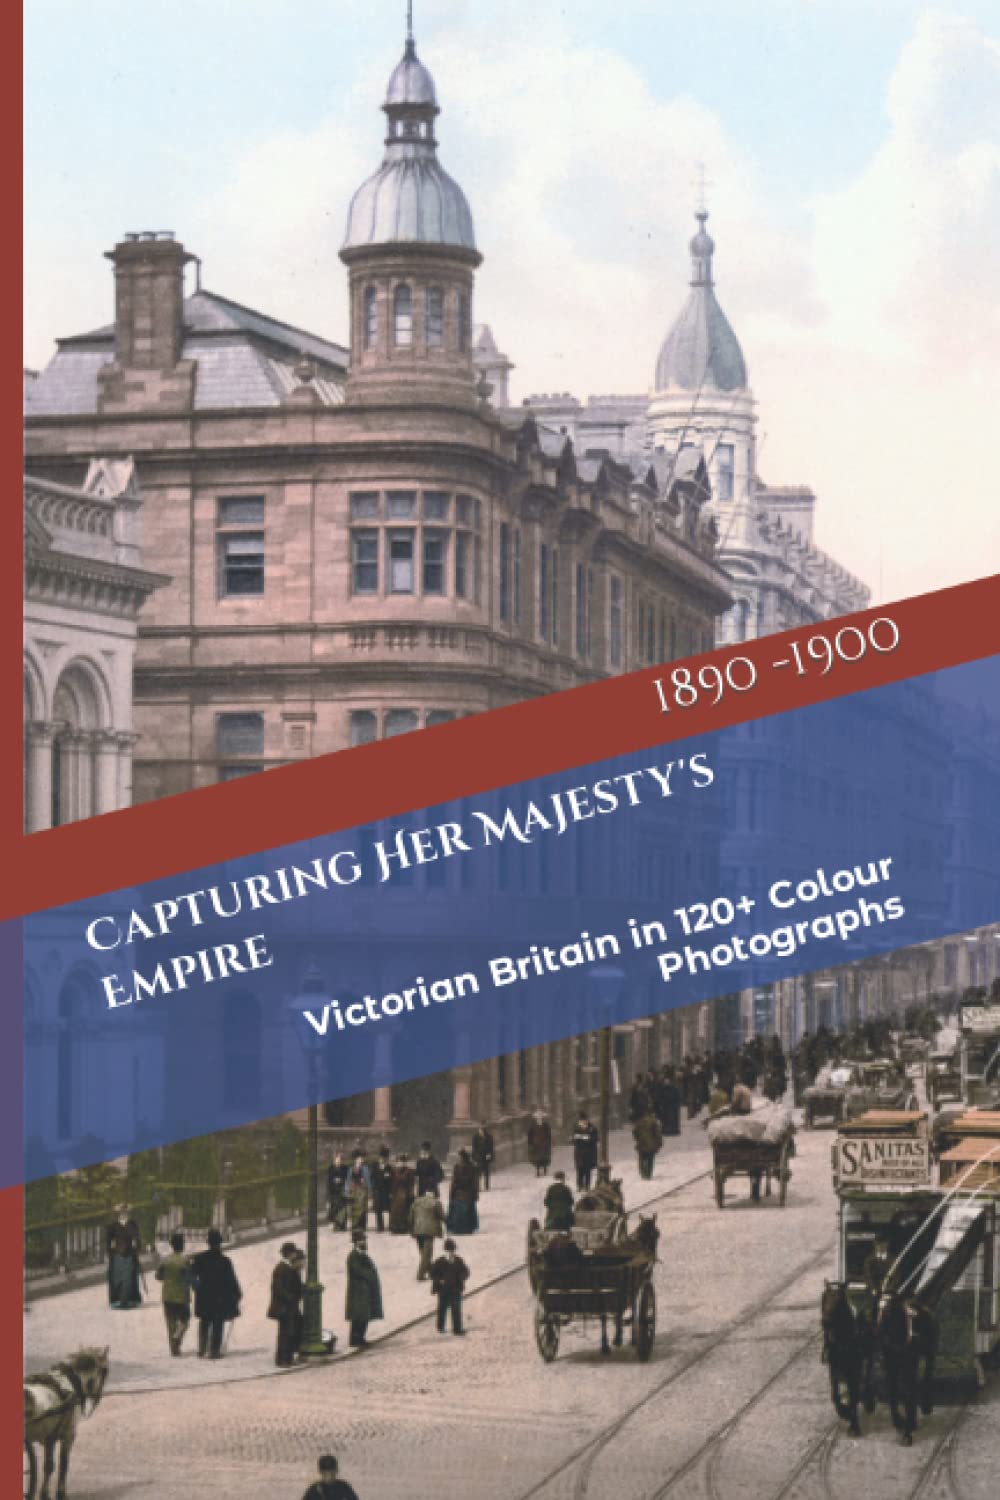 Capturing Her Majesty's Empire: Victorian Britain in 120+ Colour Photographs